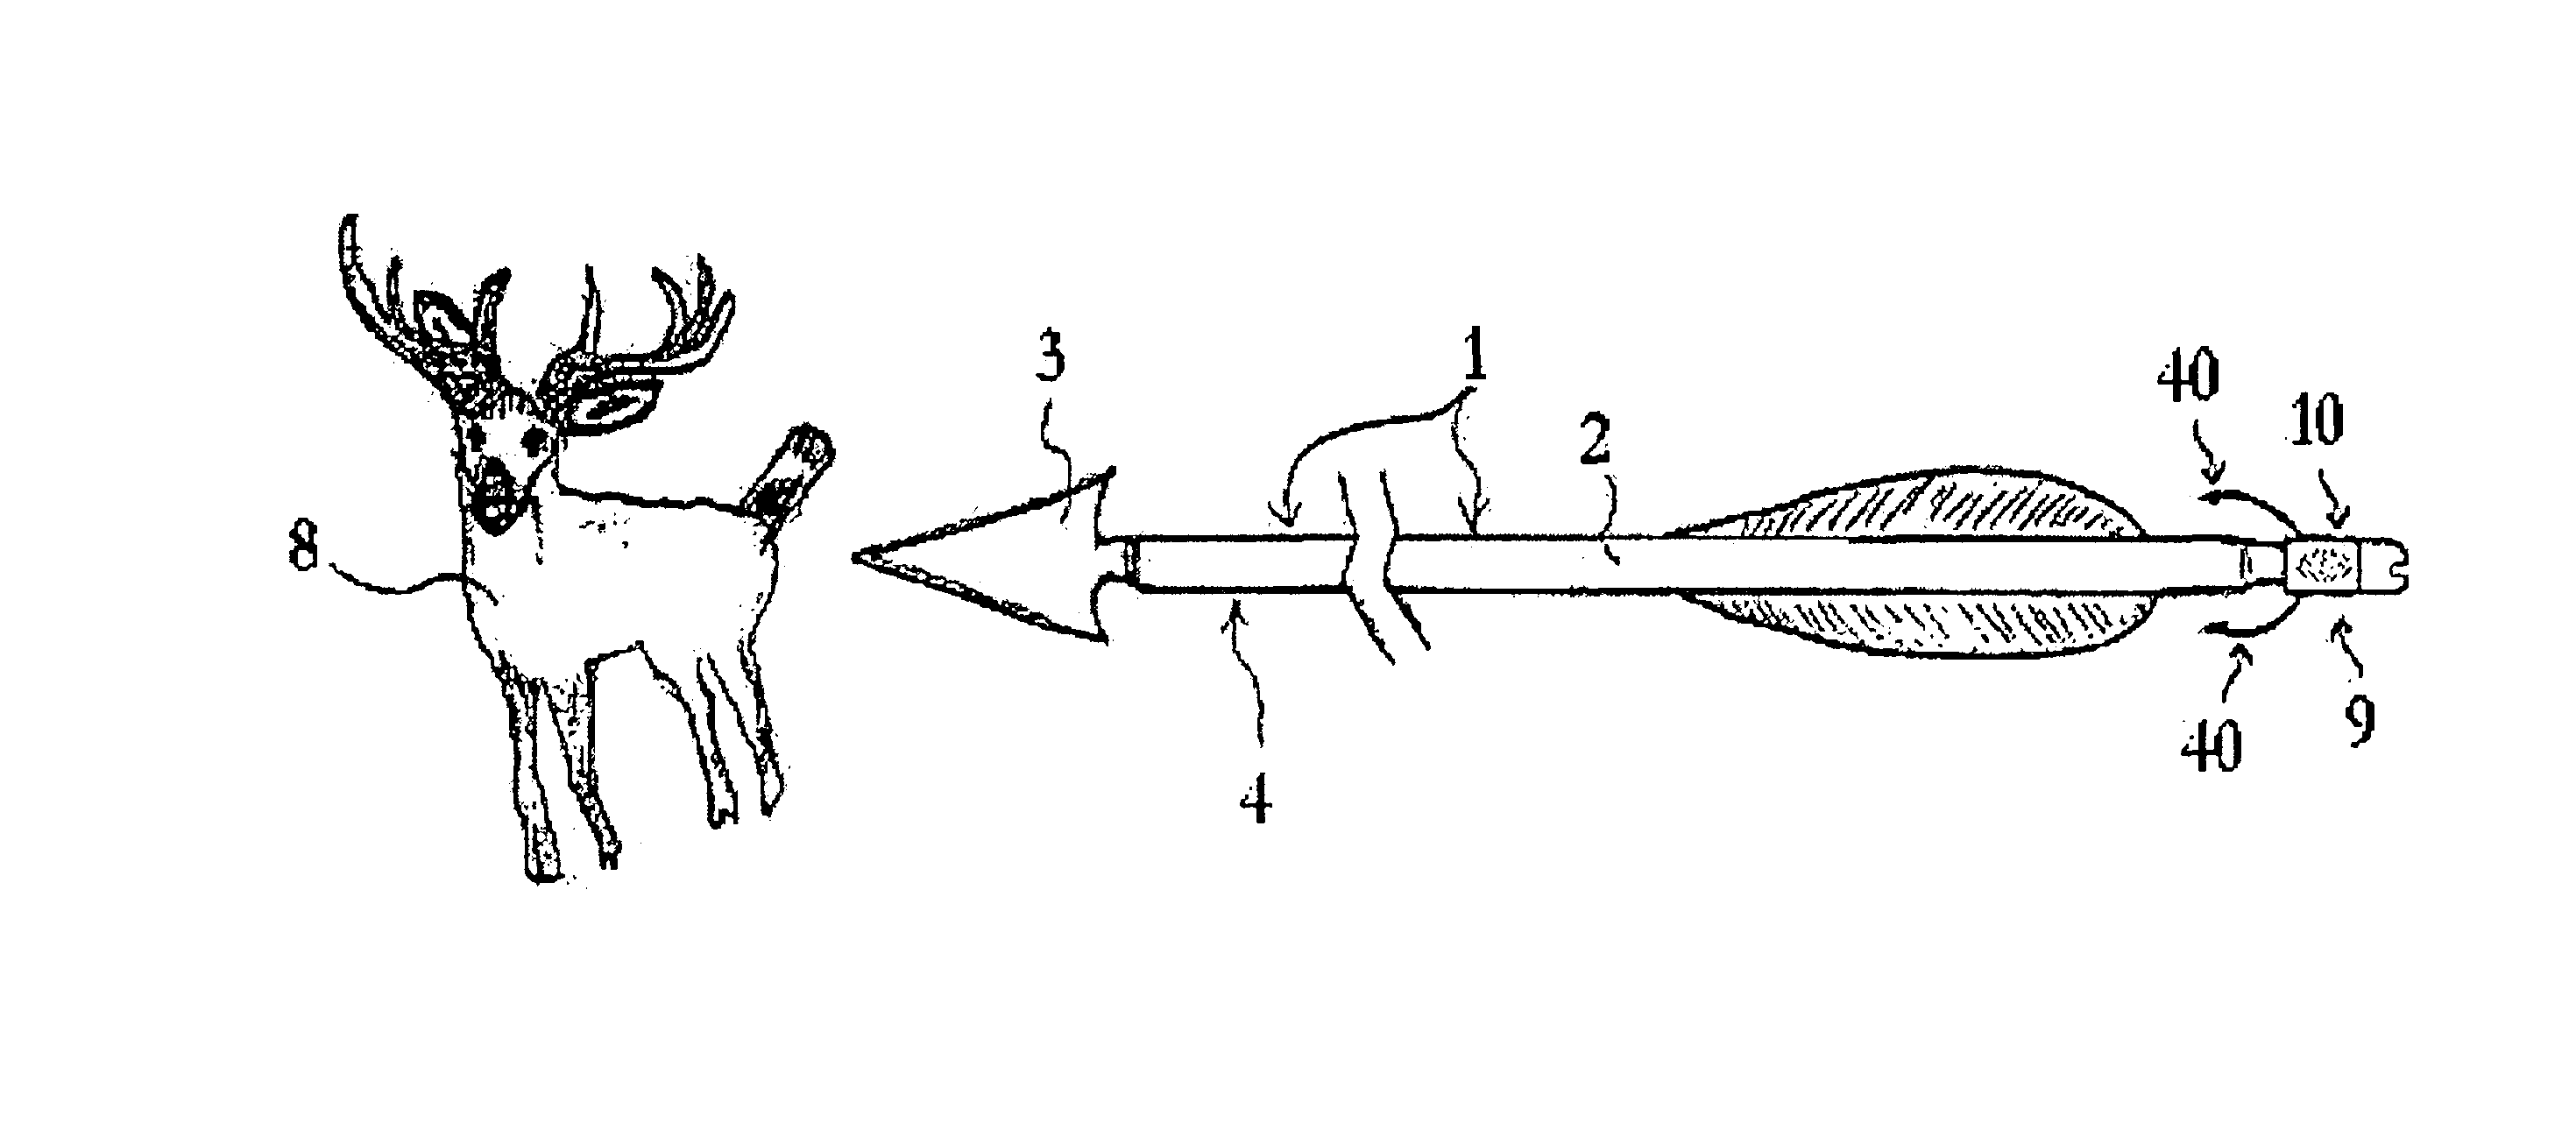 Device for detaching locator from arrow for tracking game